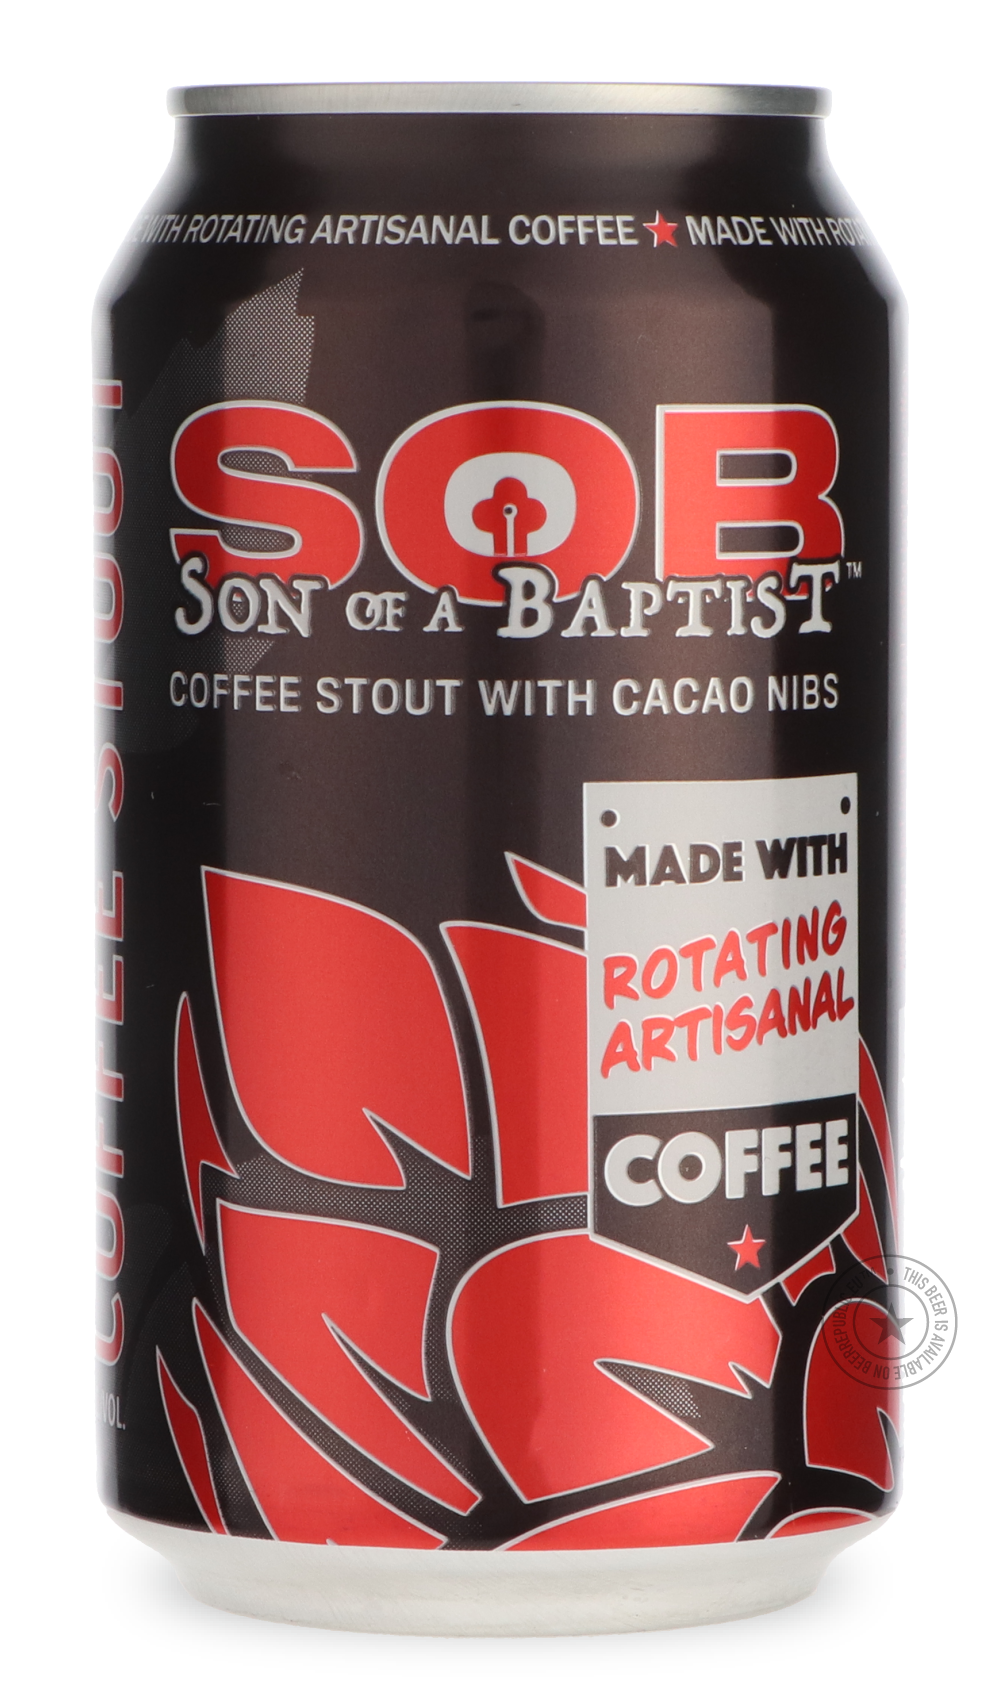 -Epic- Son of a Baptist-Stout & Porter- Only @ Beer Republic - The best online beer store for American & Canadian craft beer - Buy beer online from the USA and Canada - Bier online kopen - Amerikaans bier kopen - Craft beer store - Craft beer kopen - Amerikanisch bier kaufen - Bier online kaufen - Acheter biere online - IPA - Stout - Porter - New England IPA - Hazy IPA - Imperial Stout - Barrel Aged - Barrel Aged Imperial Stout - Brown - Dark beer - Blond - Blonde - Pilsner - Lager - Wheat - Weizen - Amber 